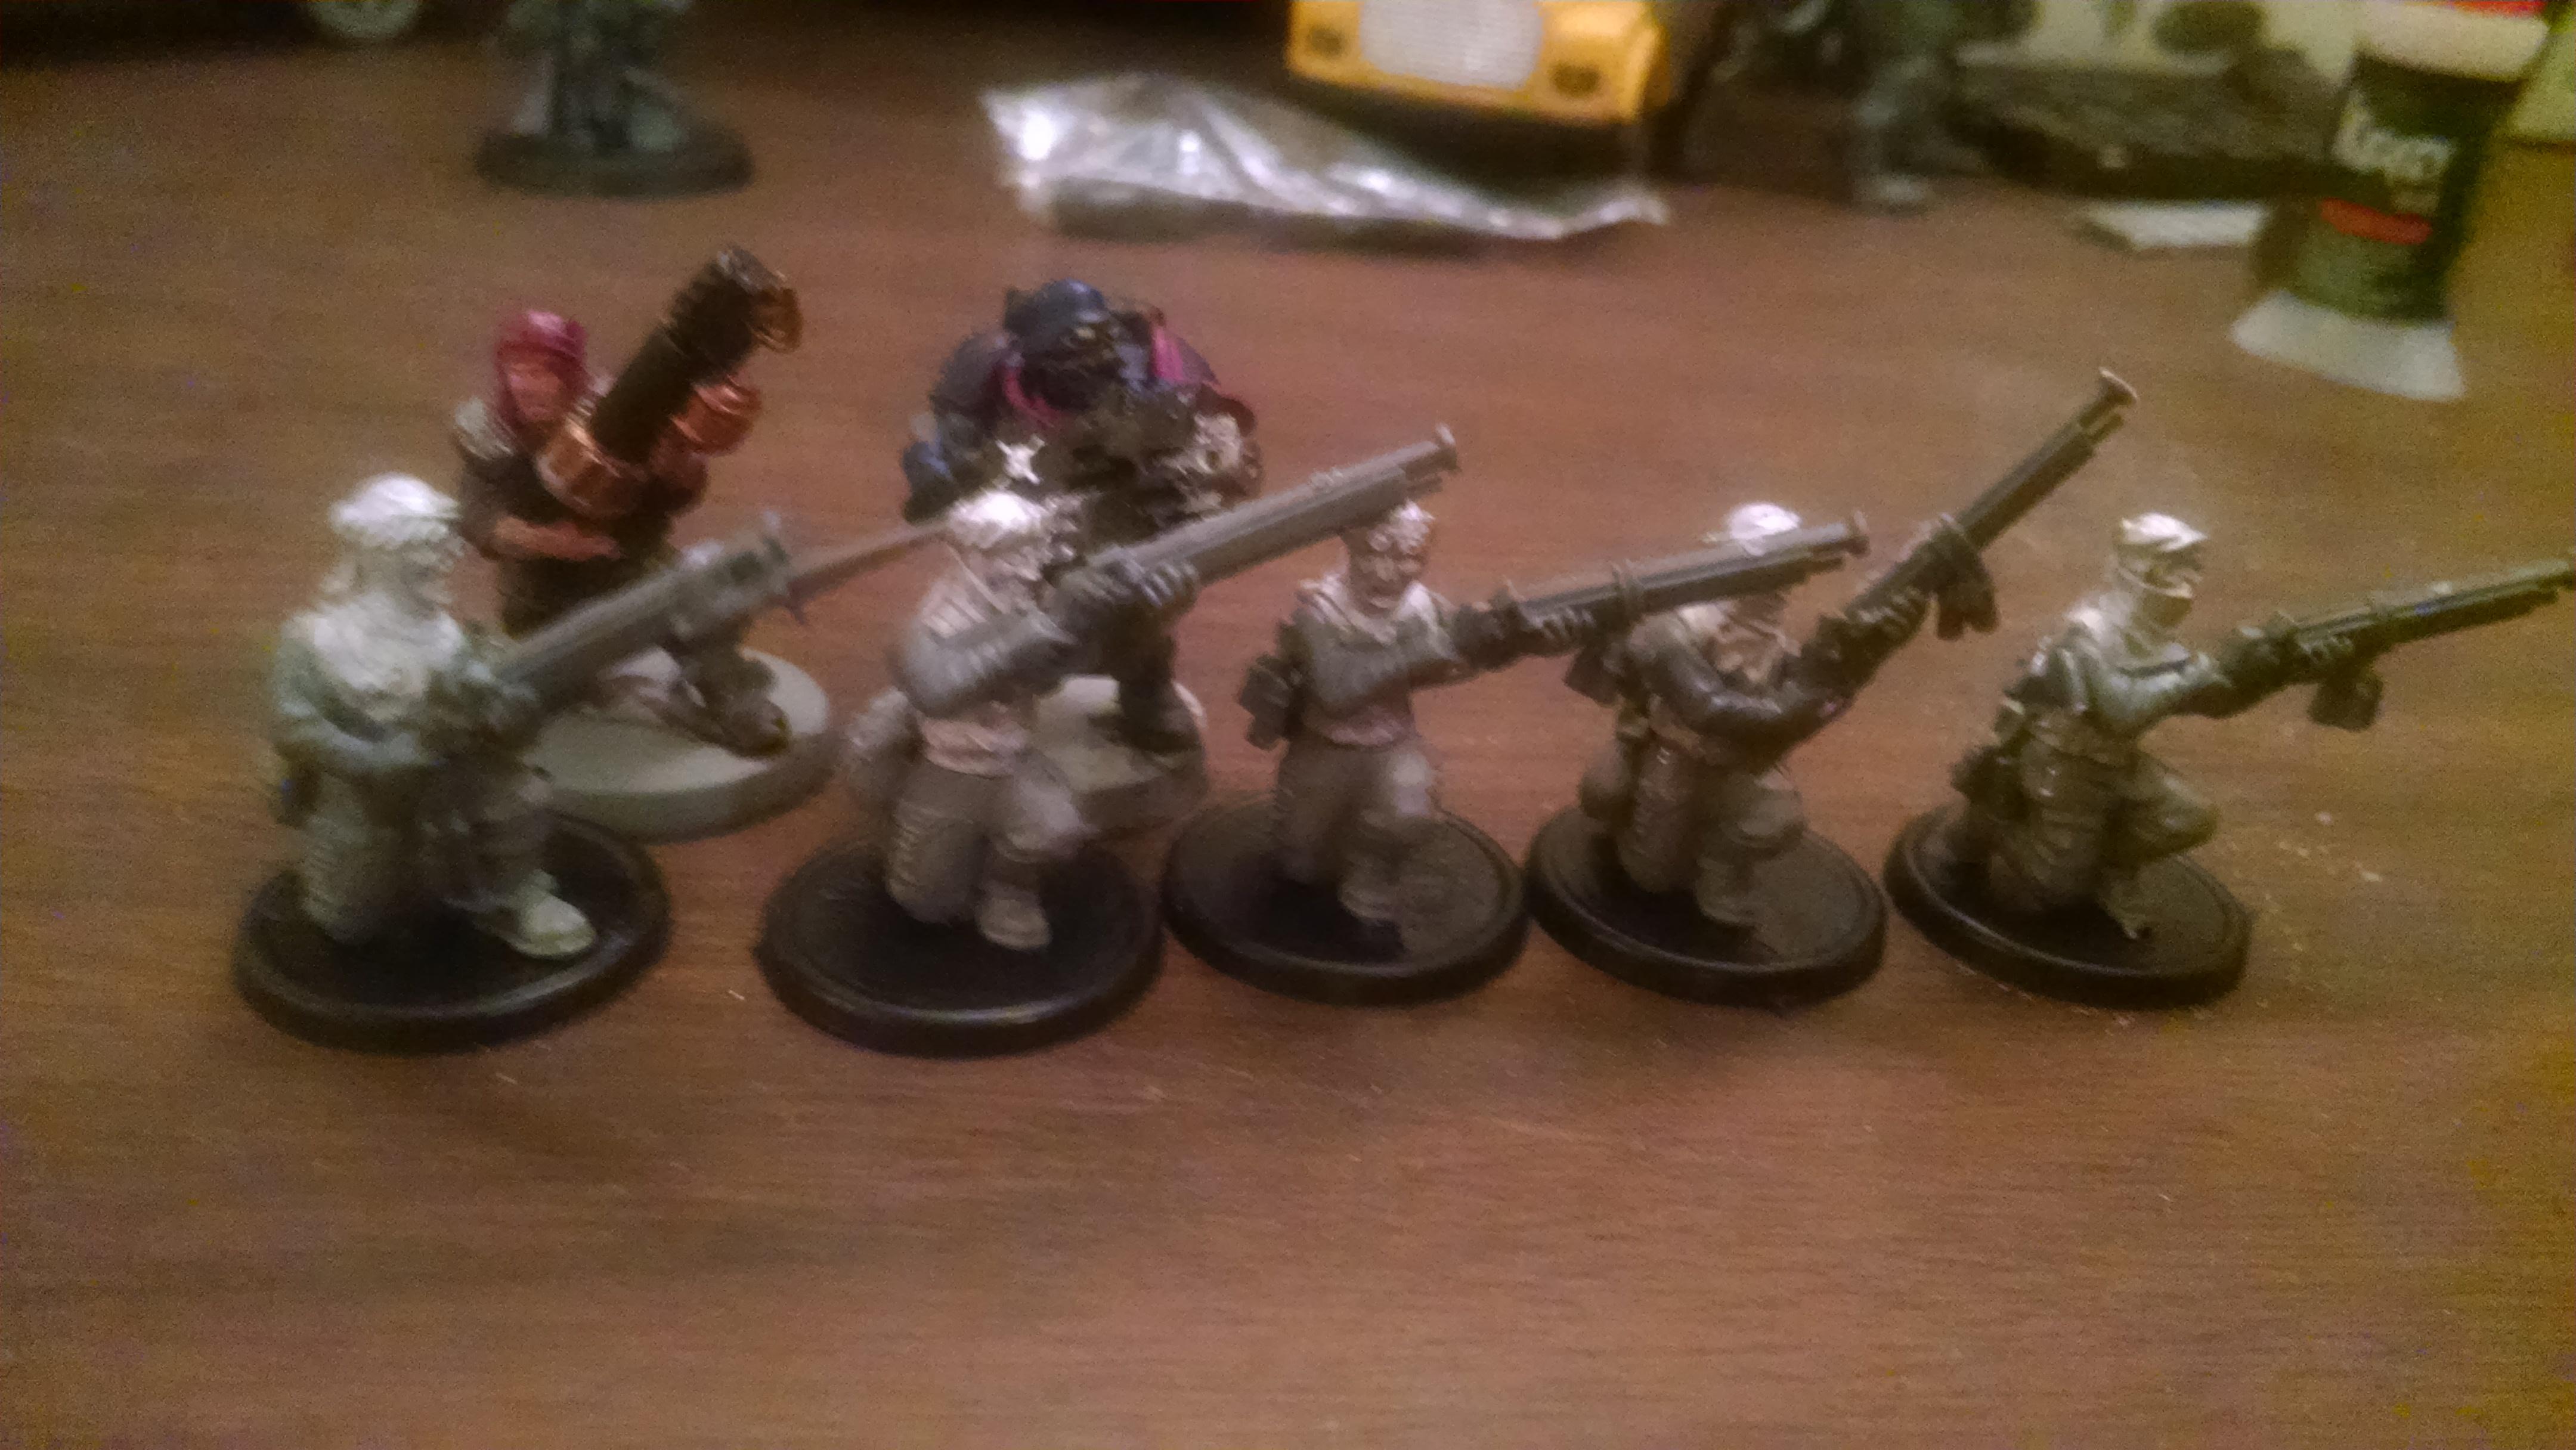 Curious Constructs, Empire, Handgunner, Imperial Guard, Ratling, Snipers, Tallarn Arab